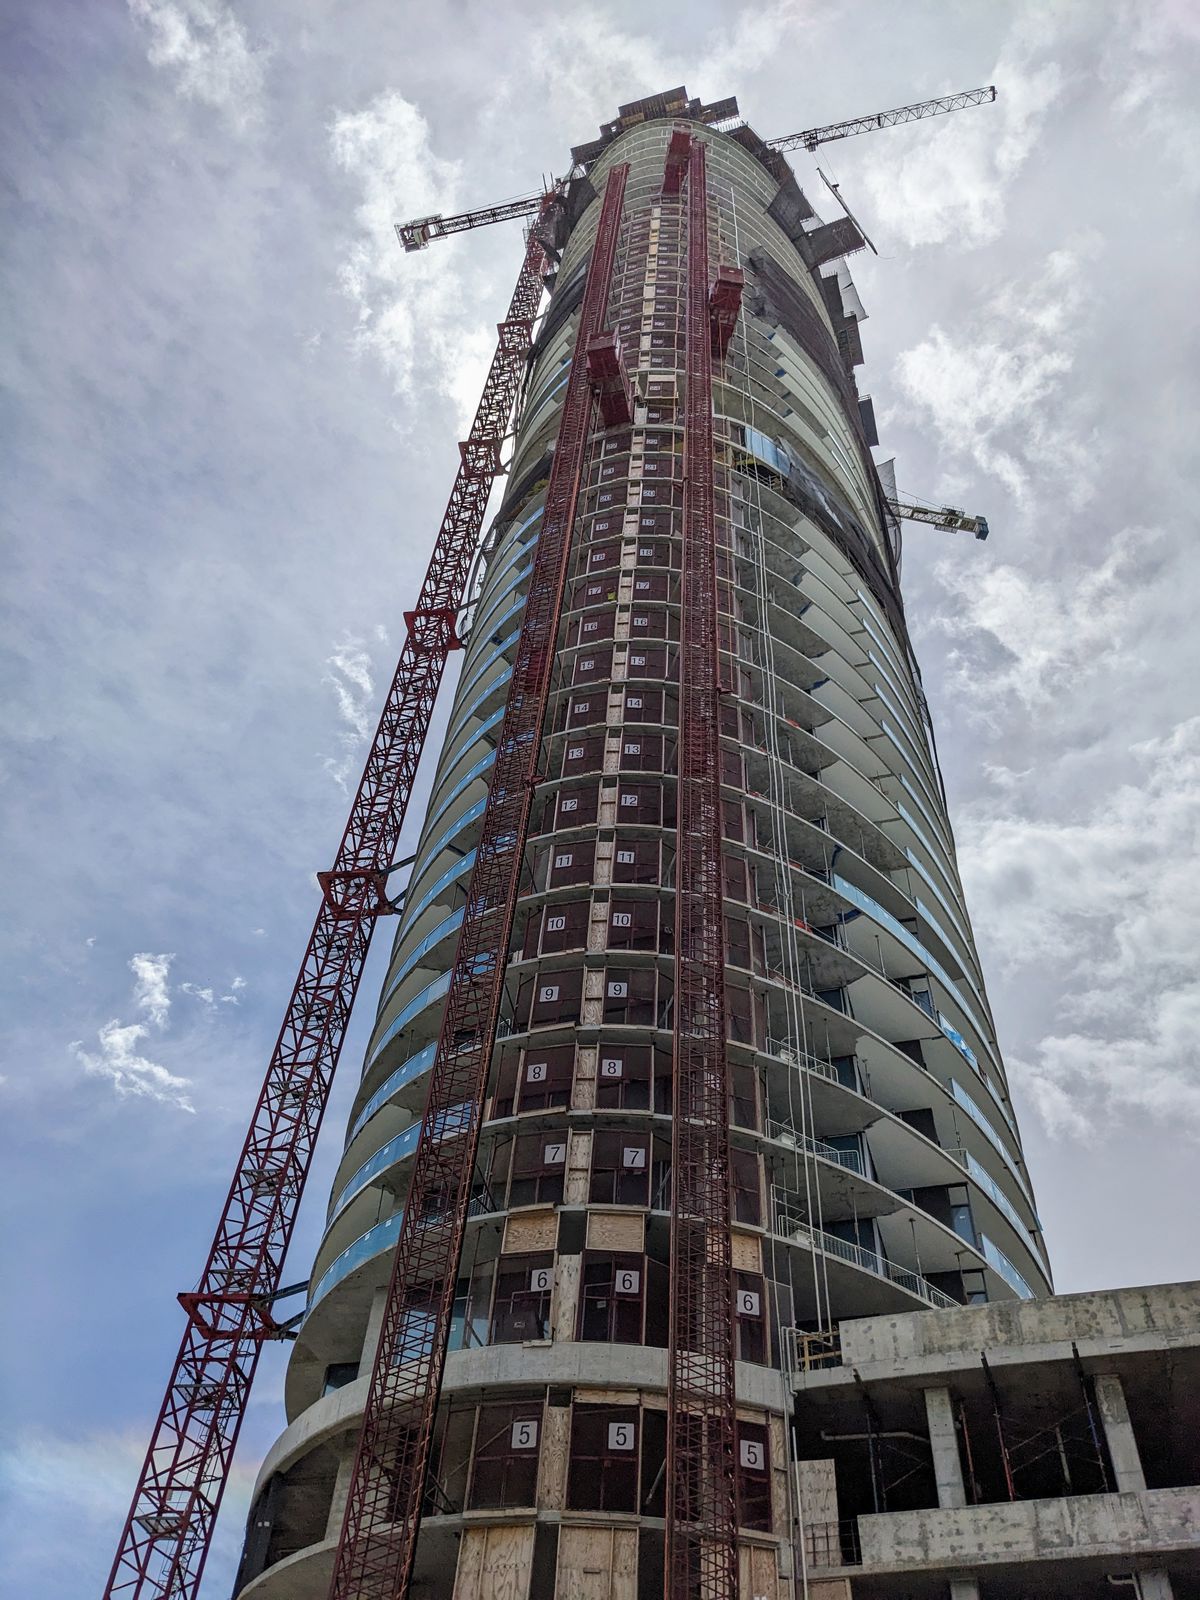 The Five Park tower under construction. It’s an oval-shaped tower with tall cranes and ladders on its sides.